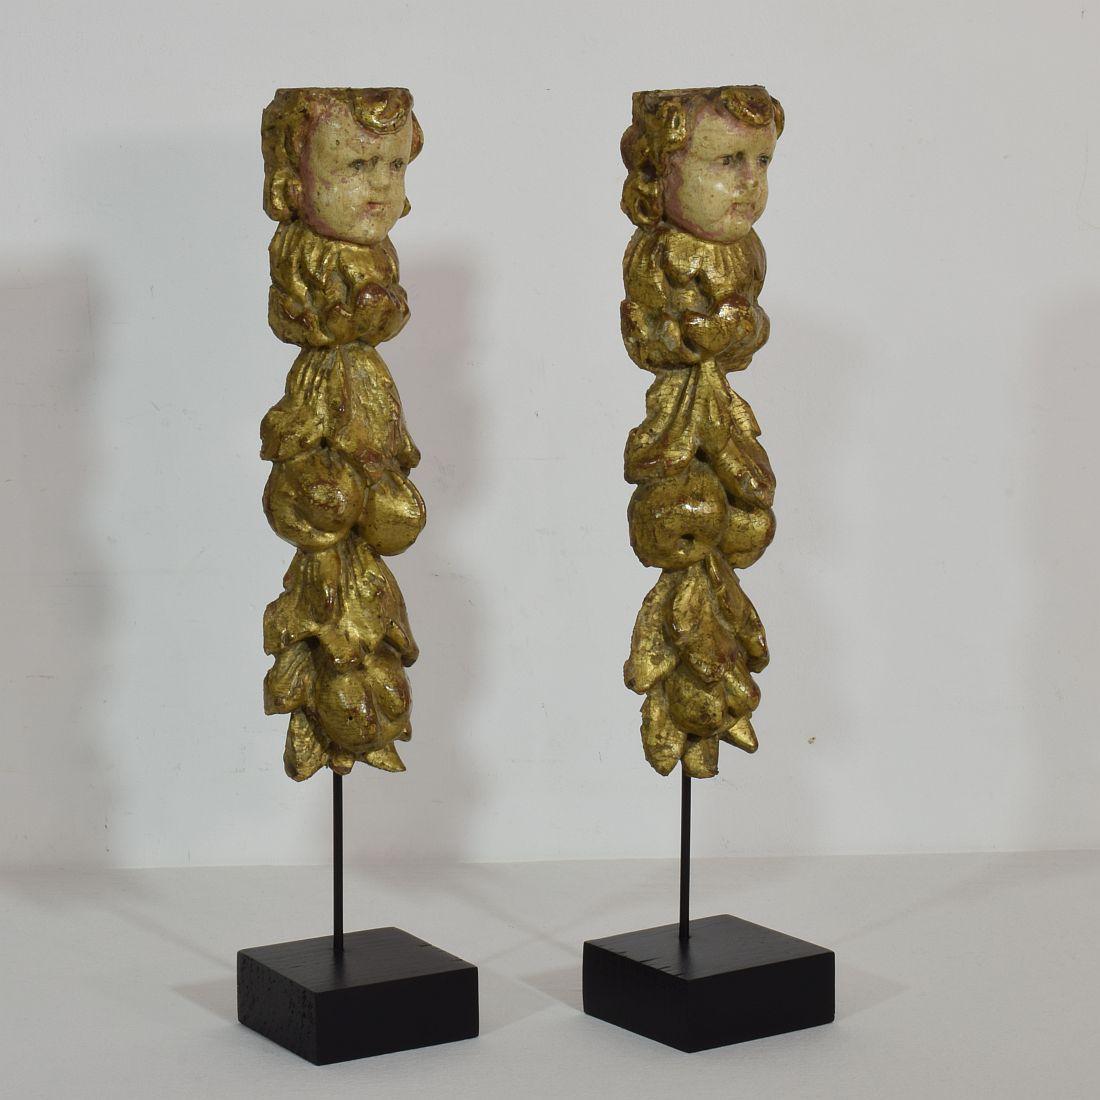 Hand-Carved Set of 2 Italian 18th Century Baroque Ornaments with Angel Heads